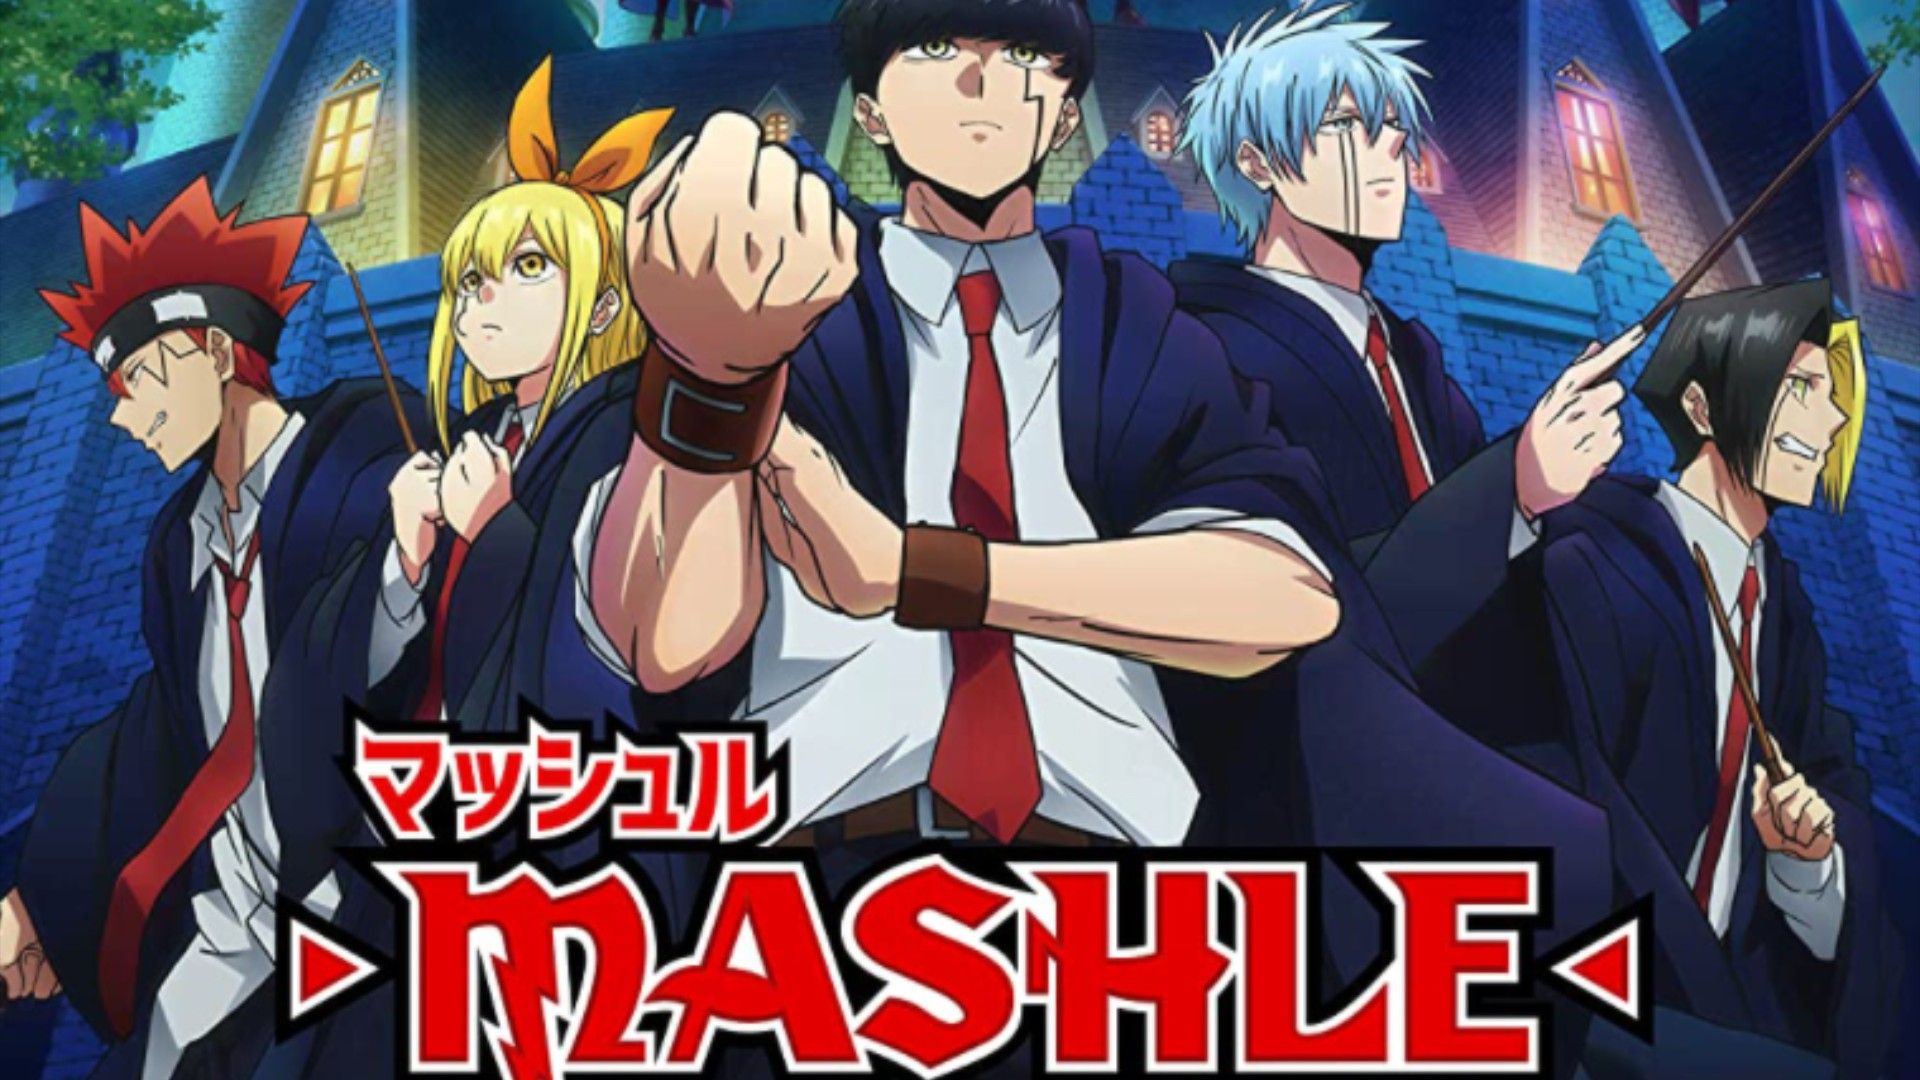 Assistir Mashle: Magic and Muscles Episodio 11 Online